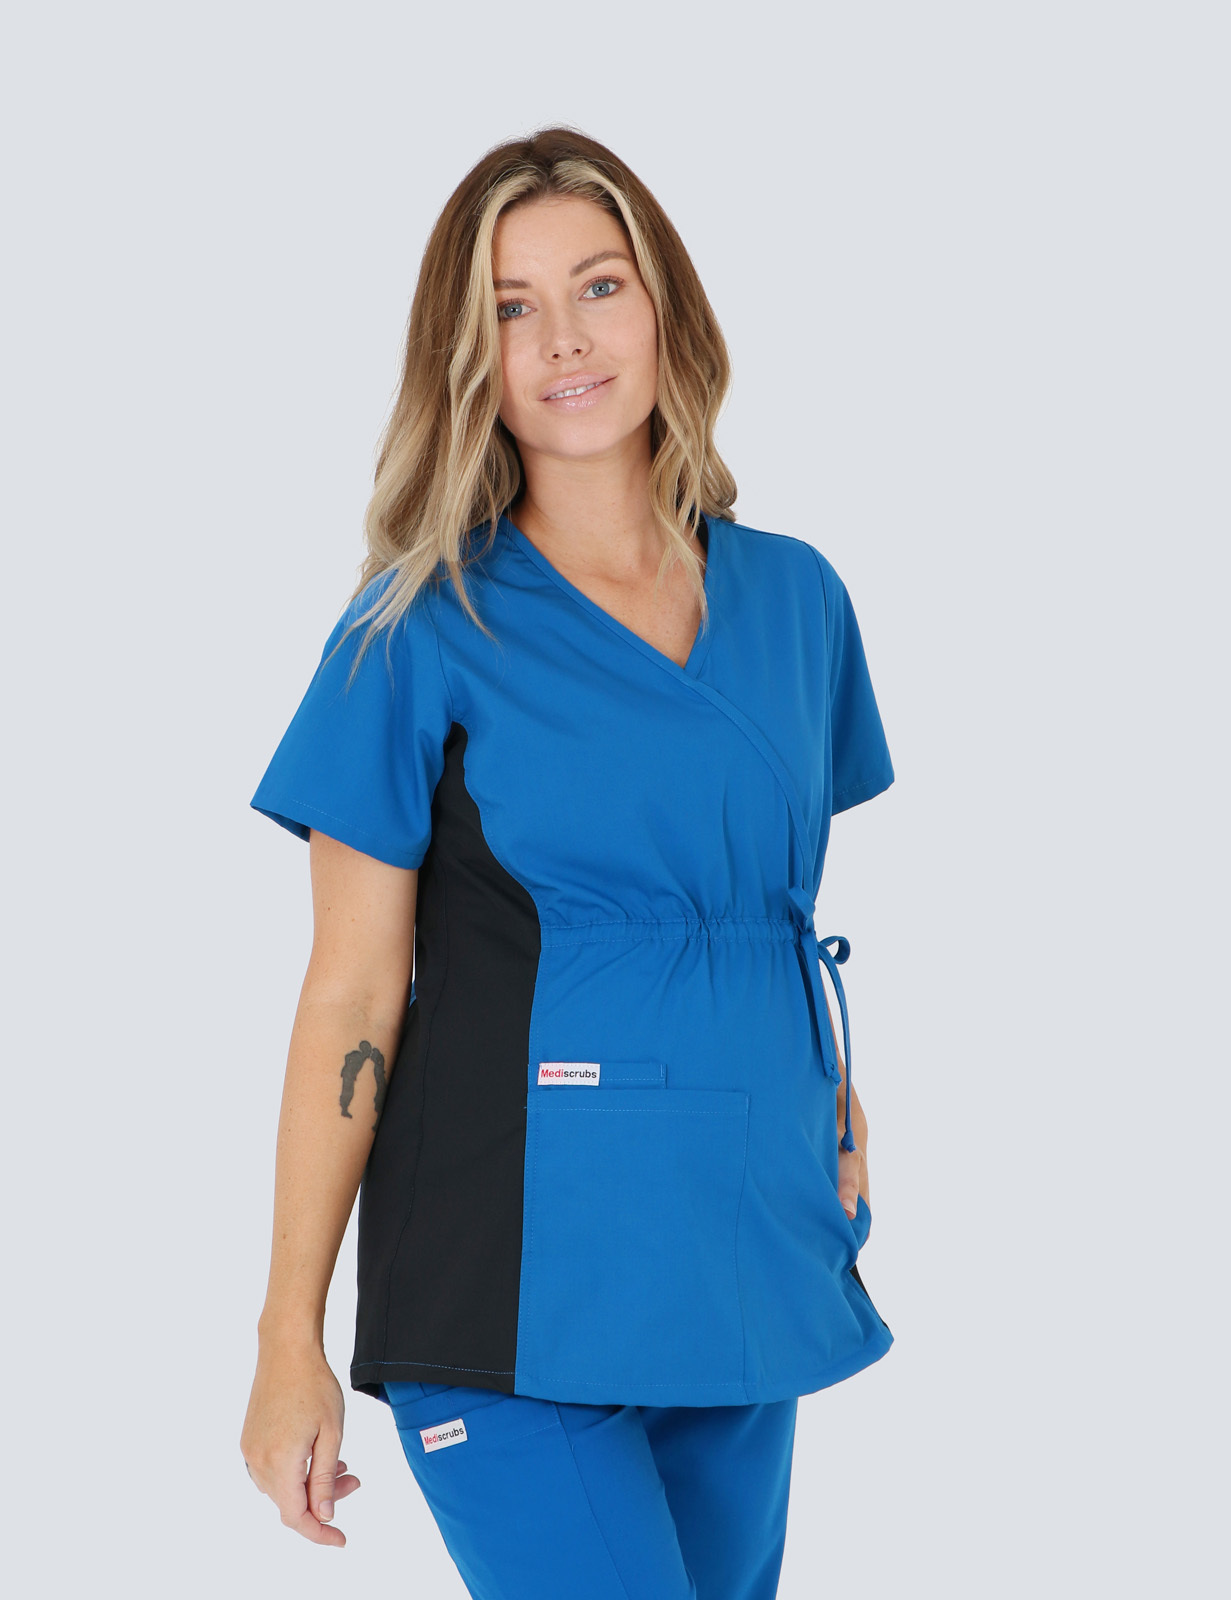 Maternity Scrub Top With Spandex Panel - Royal - 3X Large